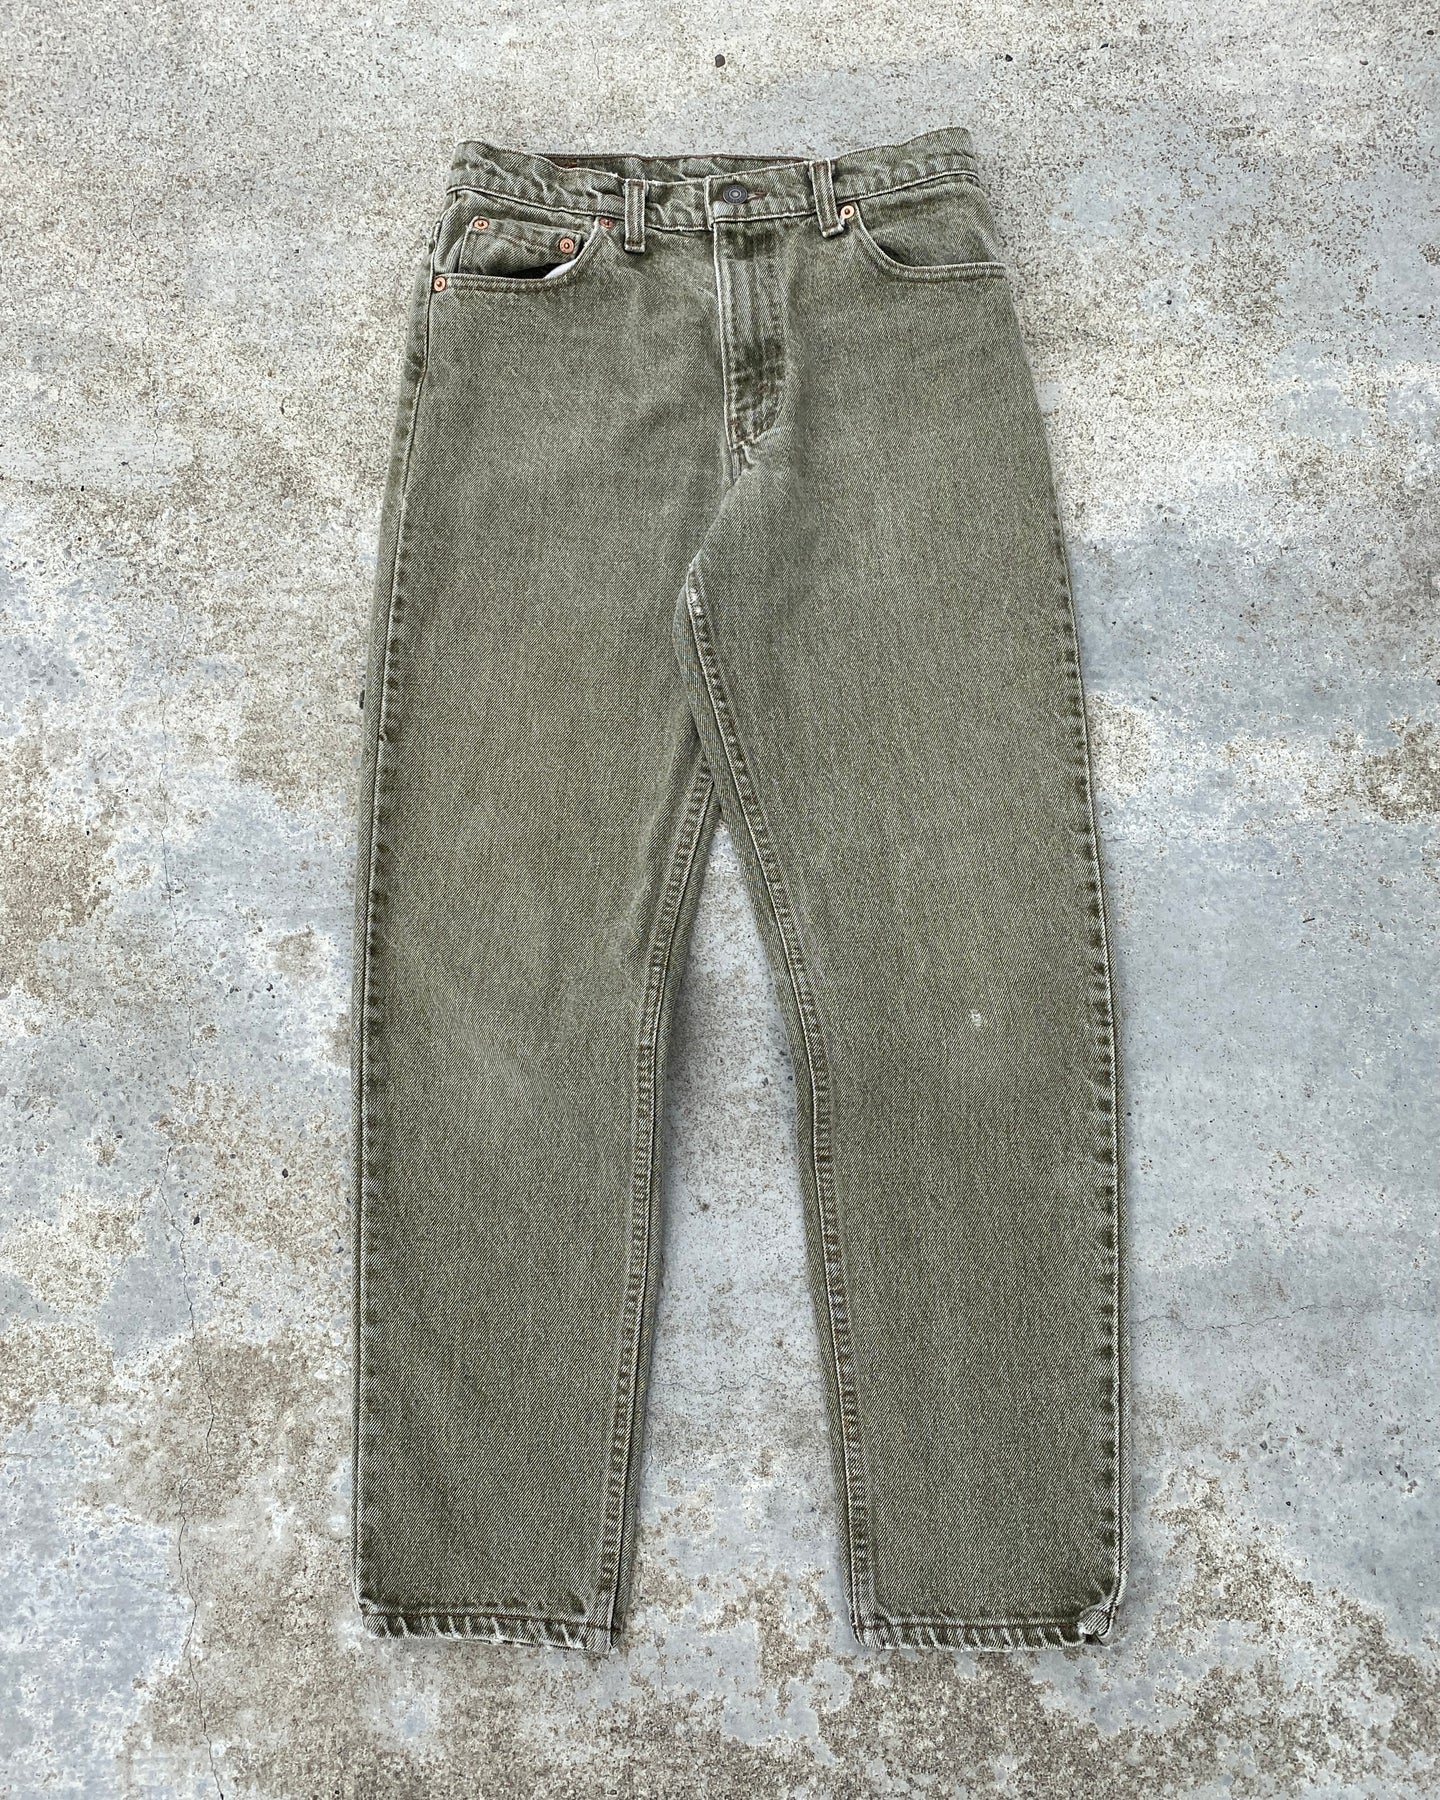 1990s Levi's 550 Sage Green Jeans - Size 30 x 30